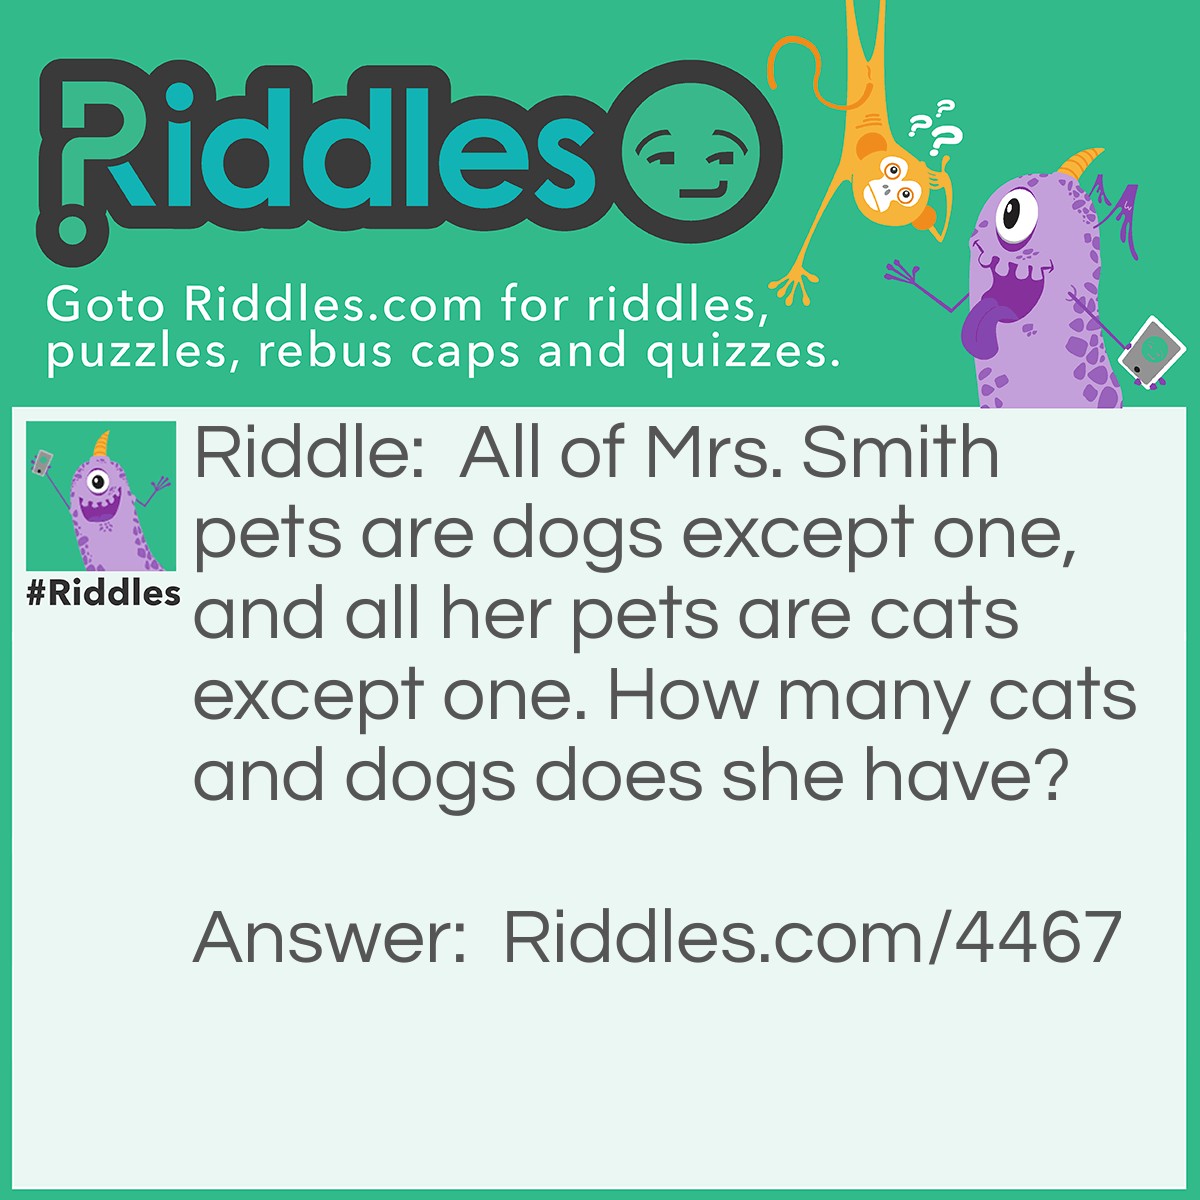 Riddle: All of Mrs. Smith's pets are dogs except one, and all her pets are cats except one. How many cats and dogs does she have? Answer: Mrs. Smith has one cat and one dog.